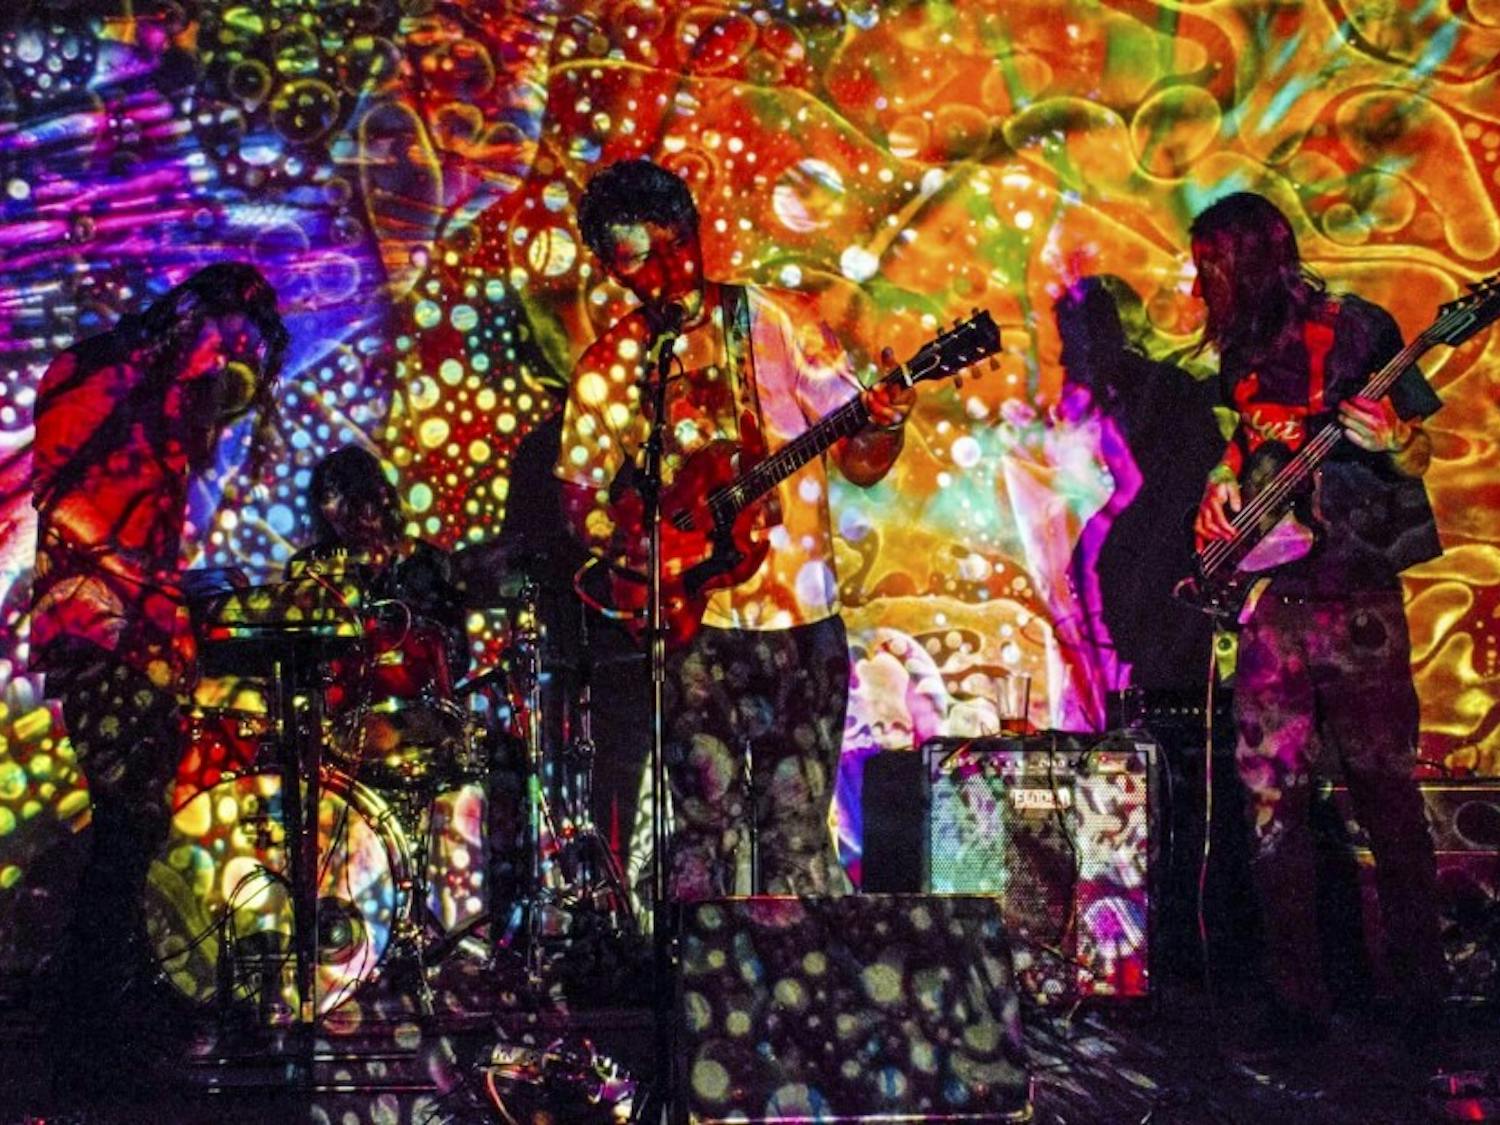 Members of Sun Dog play with a projection cast upon them. Sun Dog is a psychedelic rock band based out of Albuquerque.